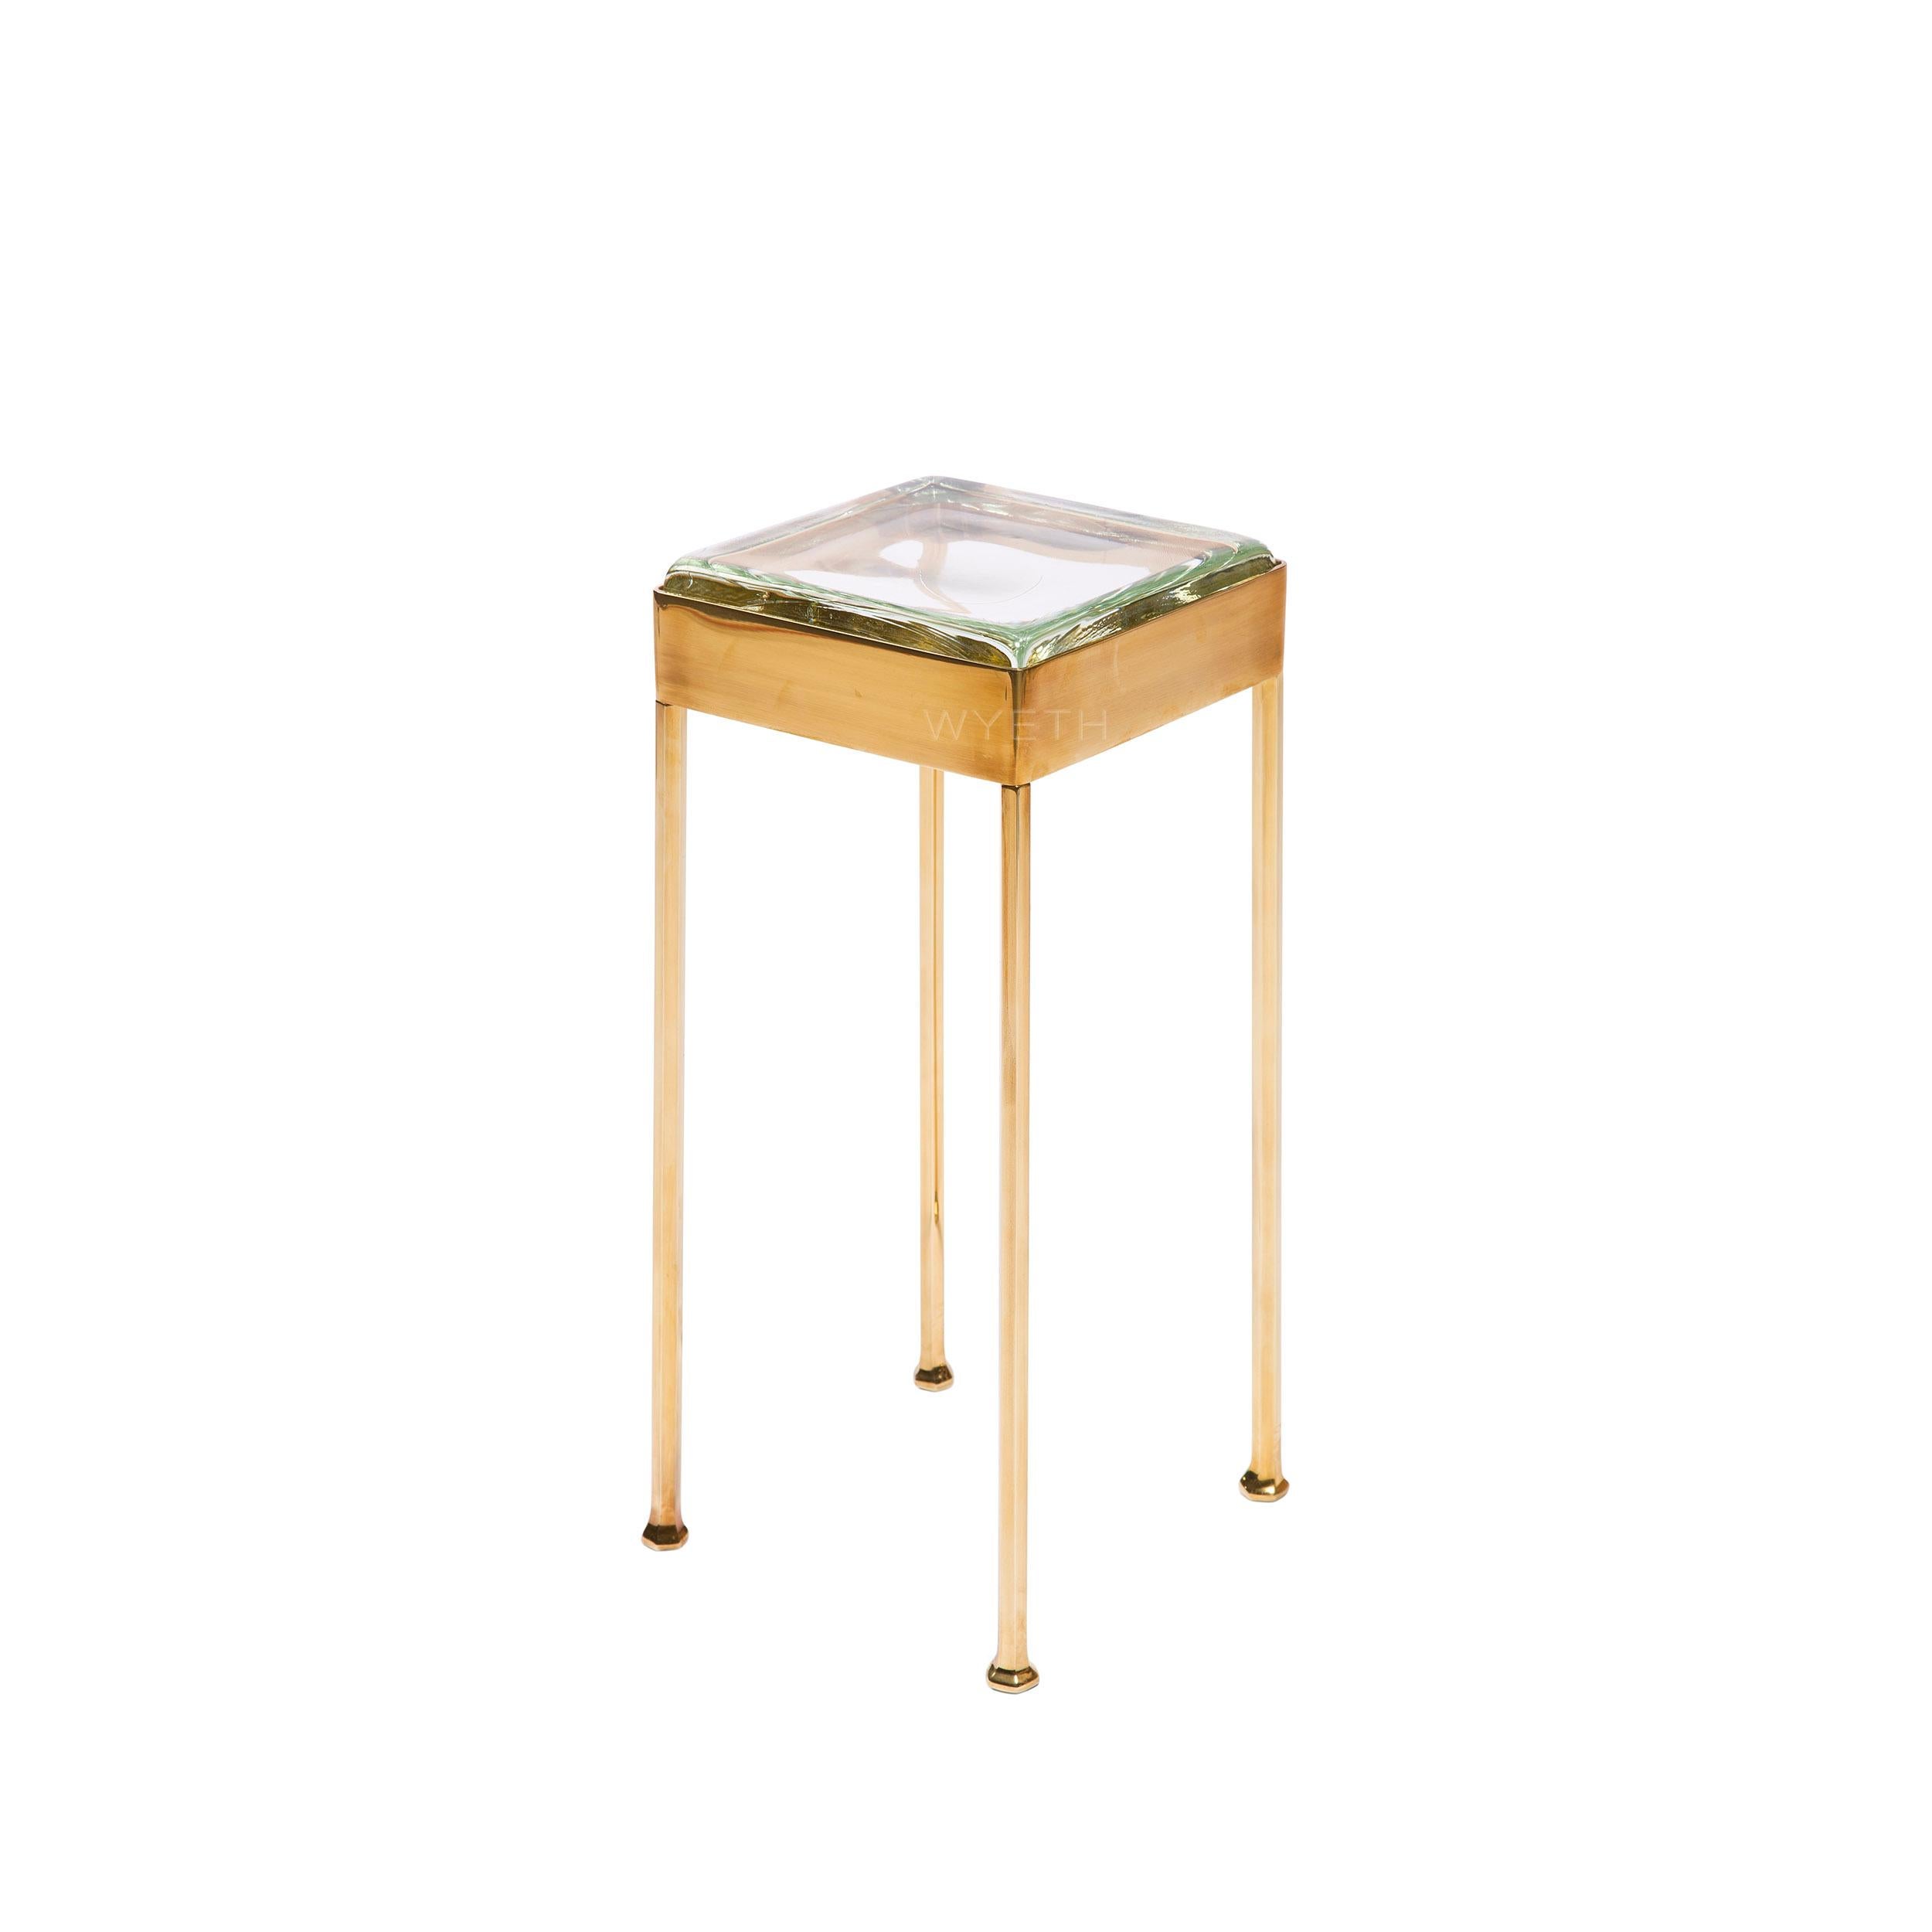 American Wyeth Original Glass Block Cocktail / Side Table in Polished Bronze For Sale